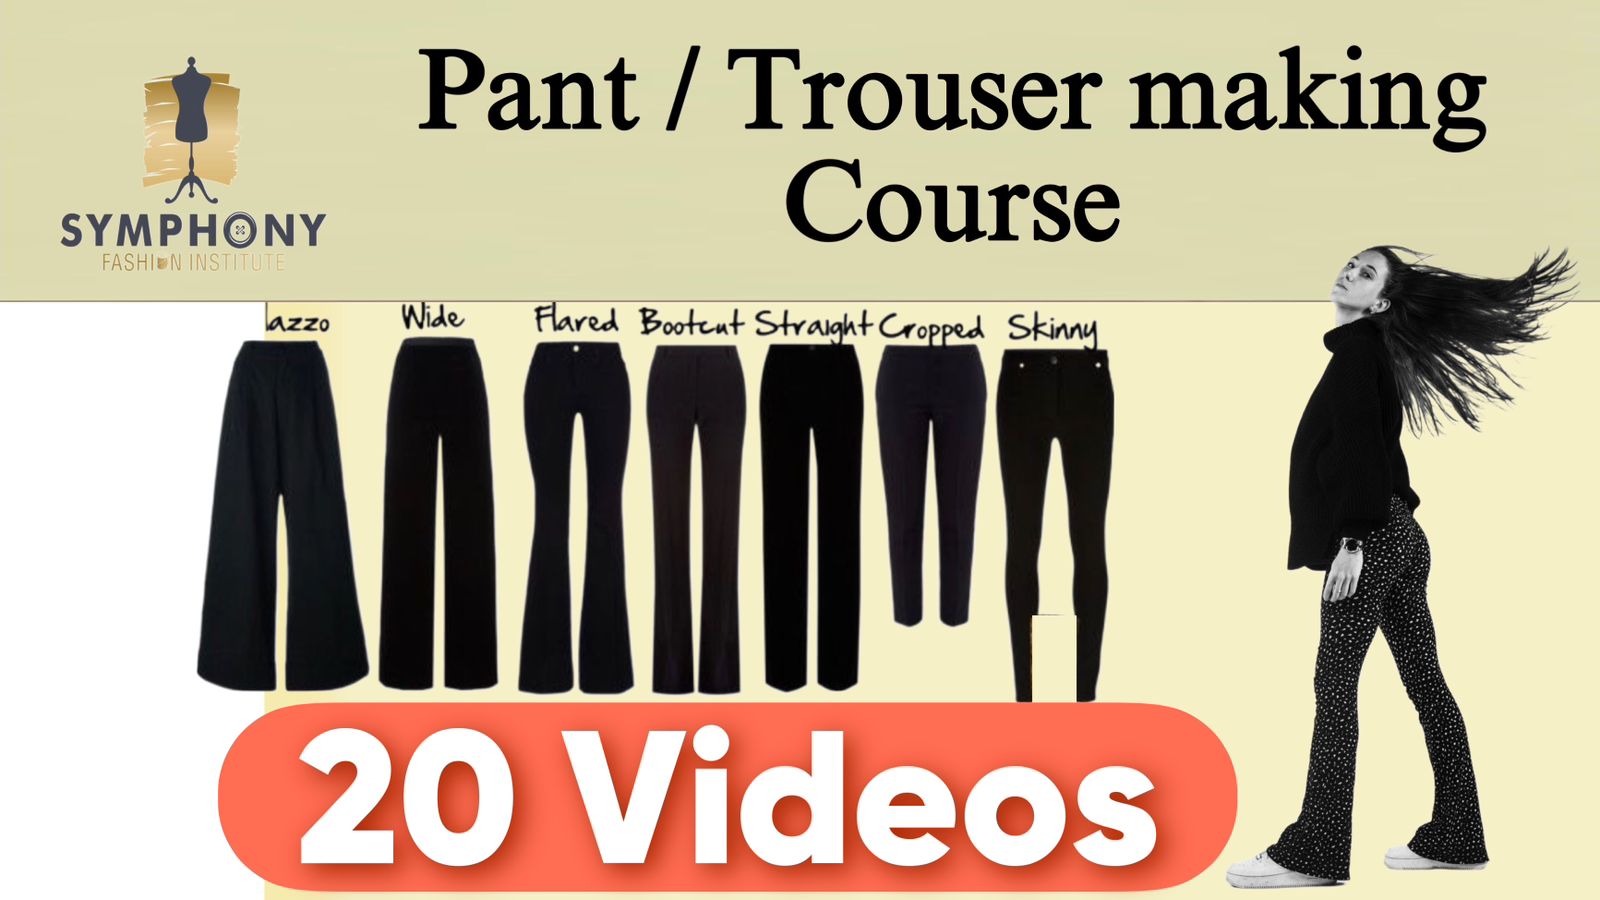 Pant and Trouser making